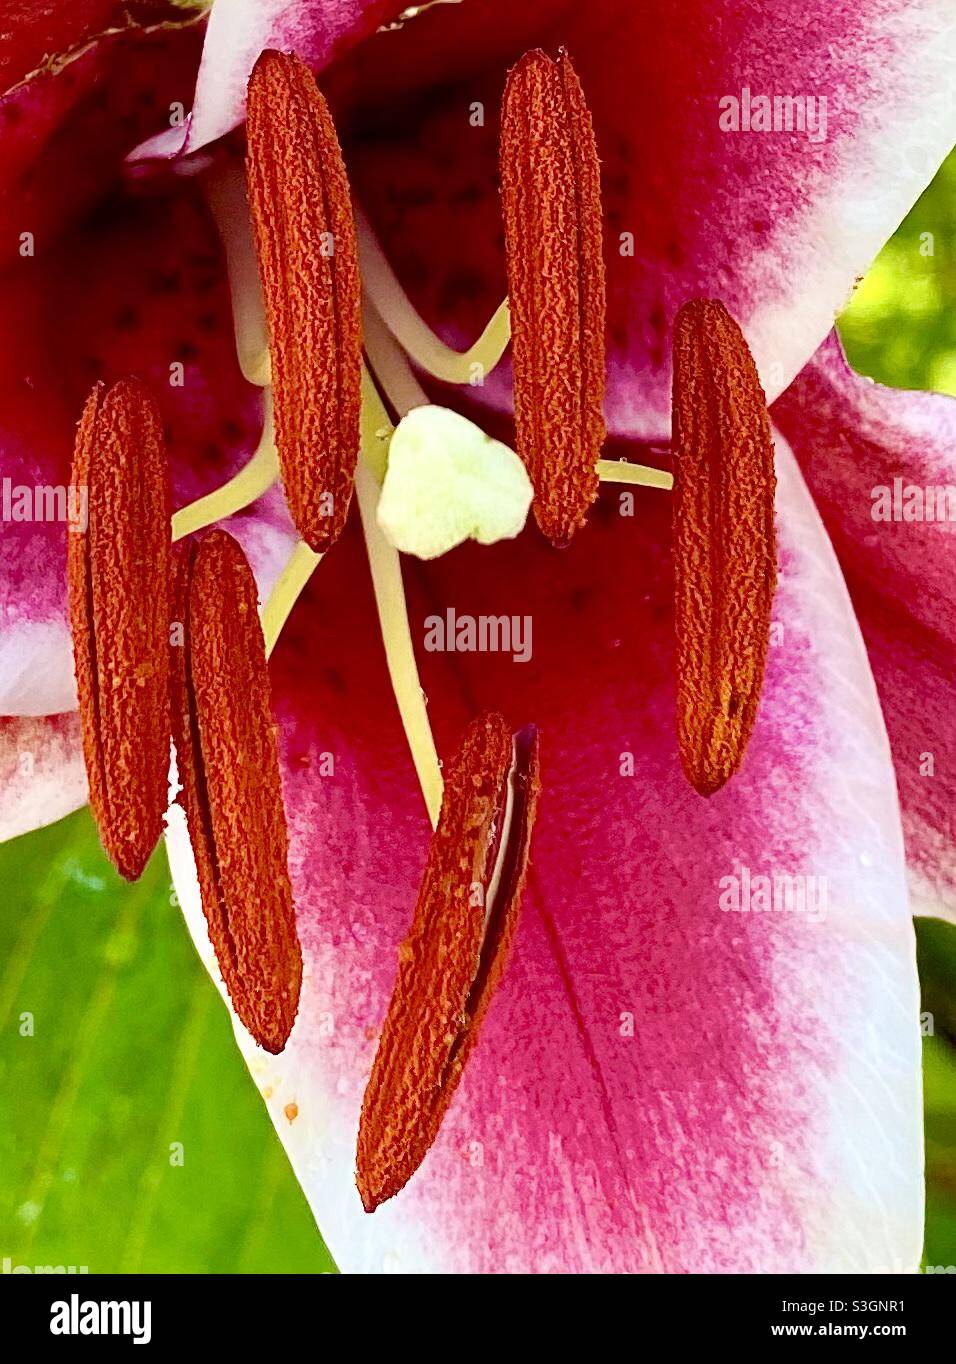 Asiatic Lily with stamens and anthers Stock Photo